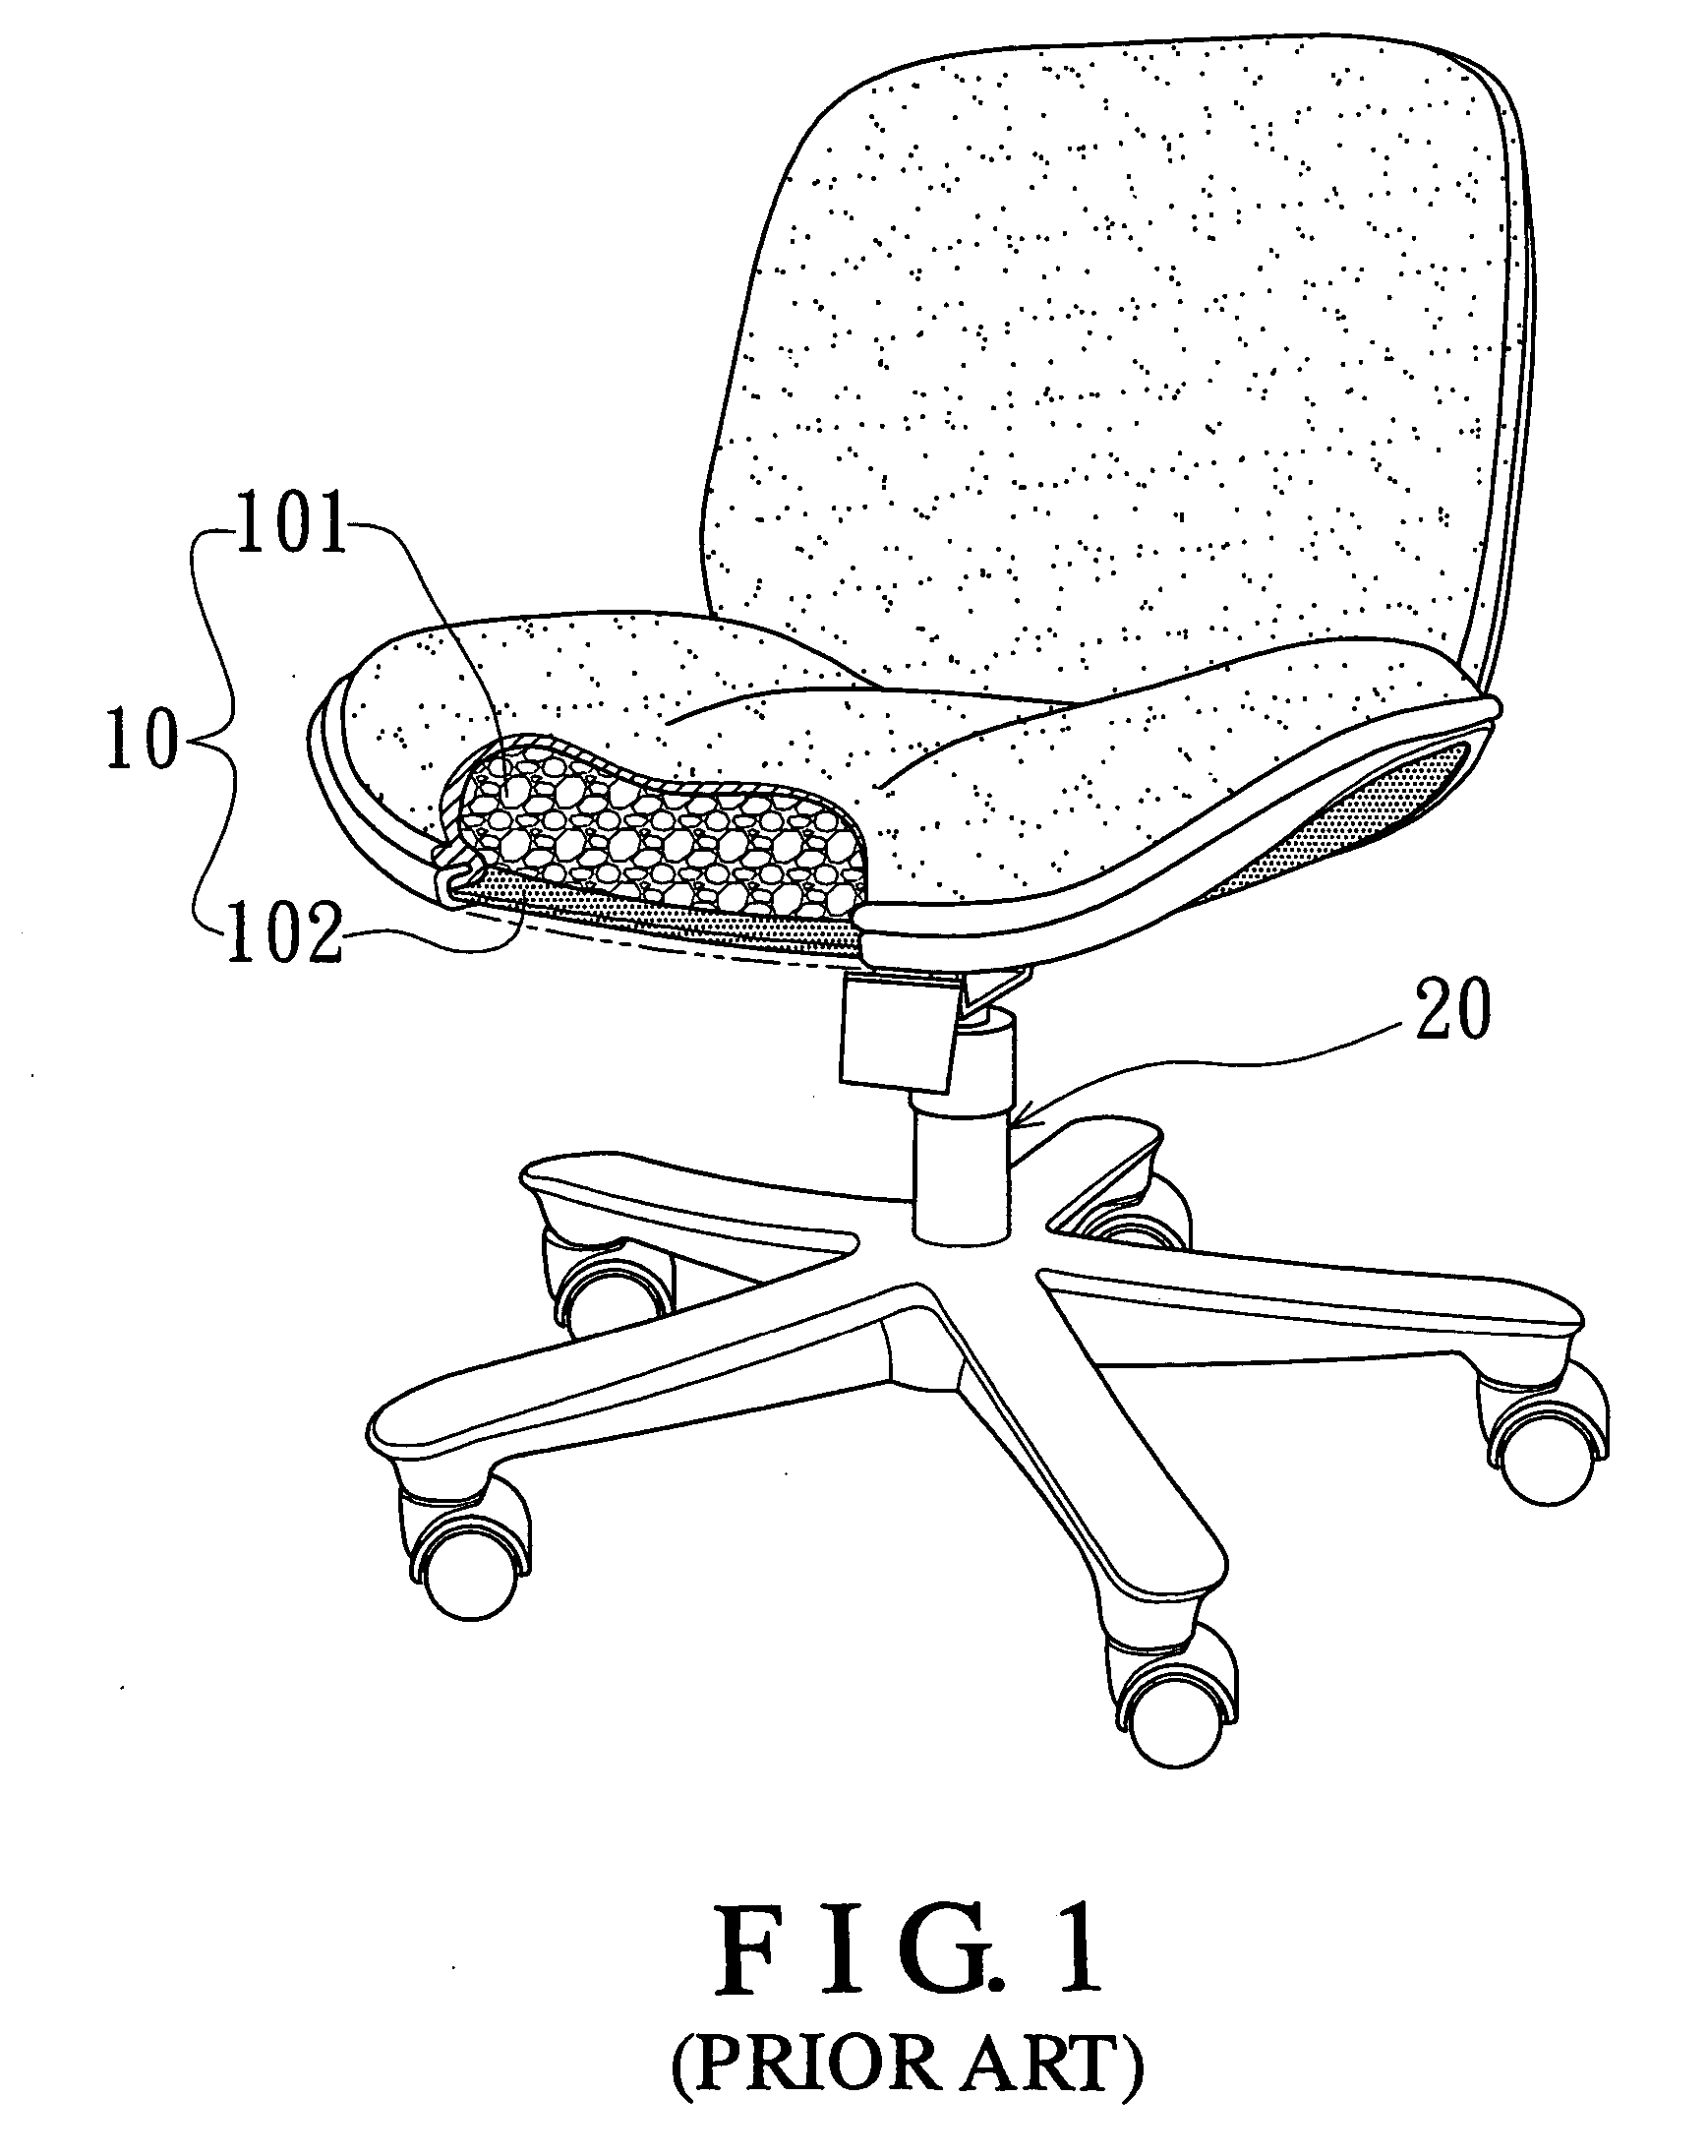 Structure of a seat of a chair